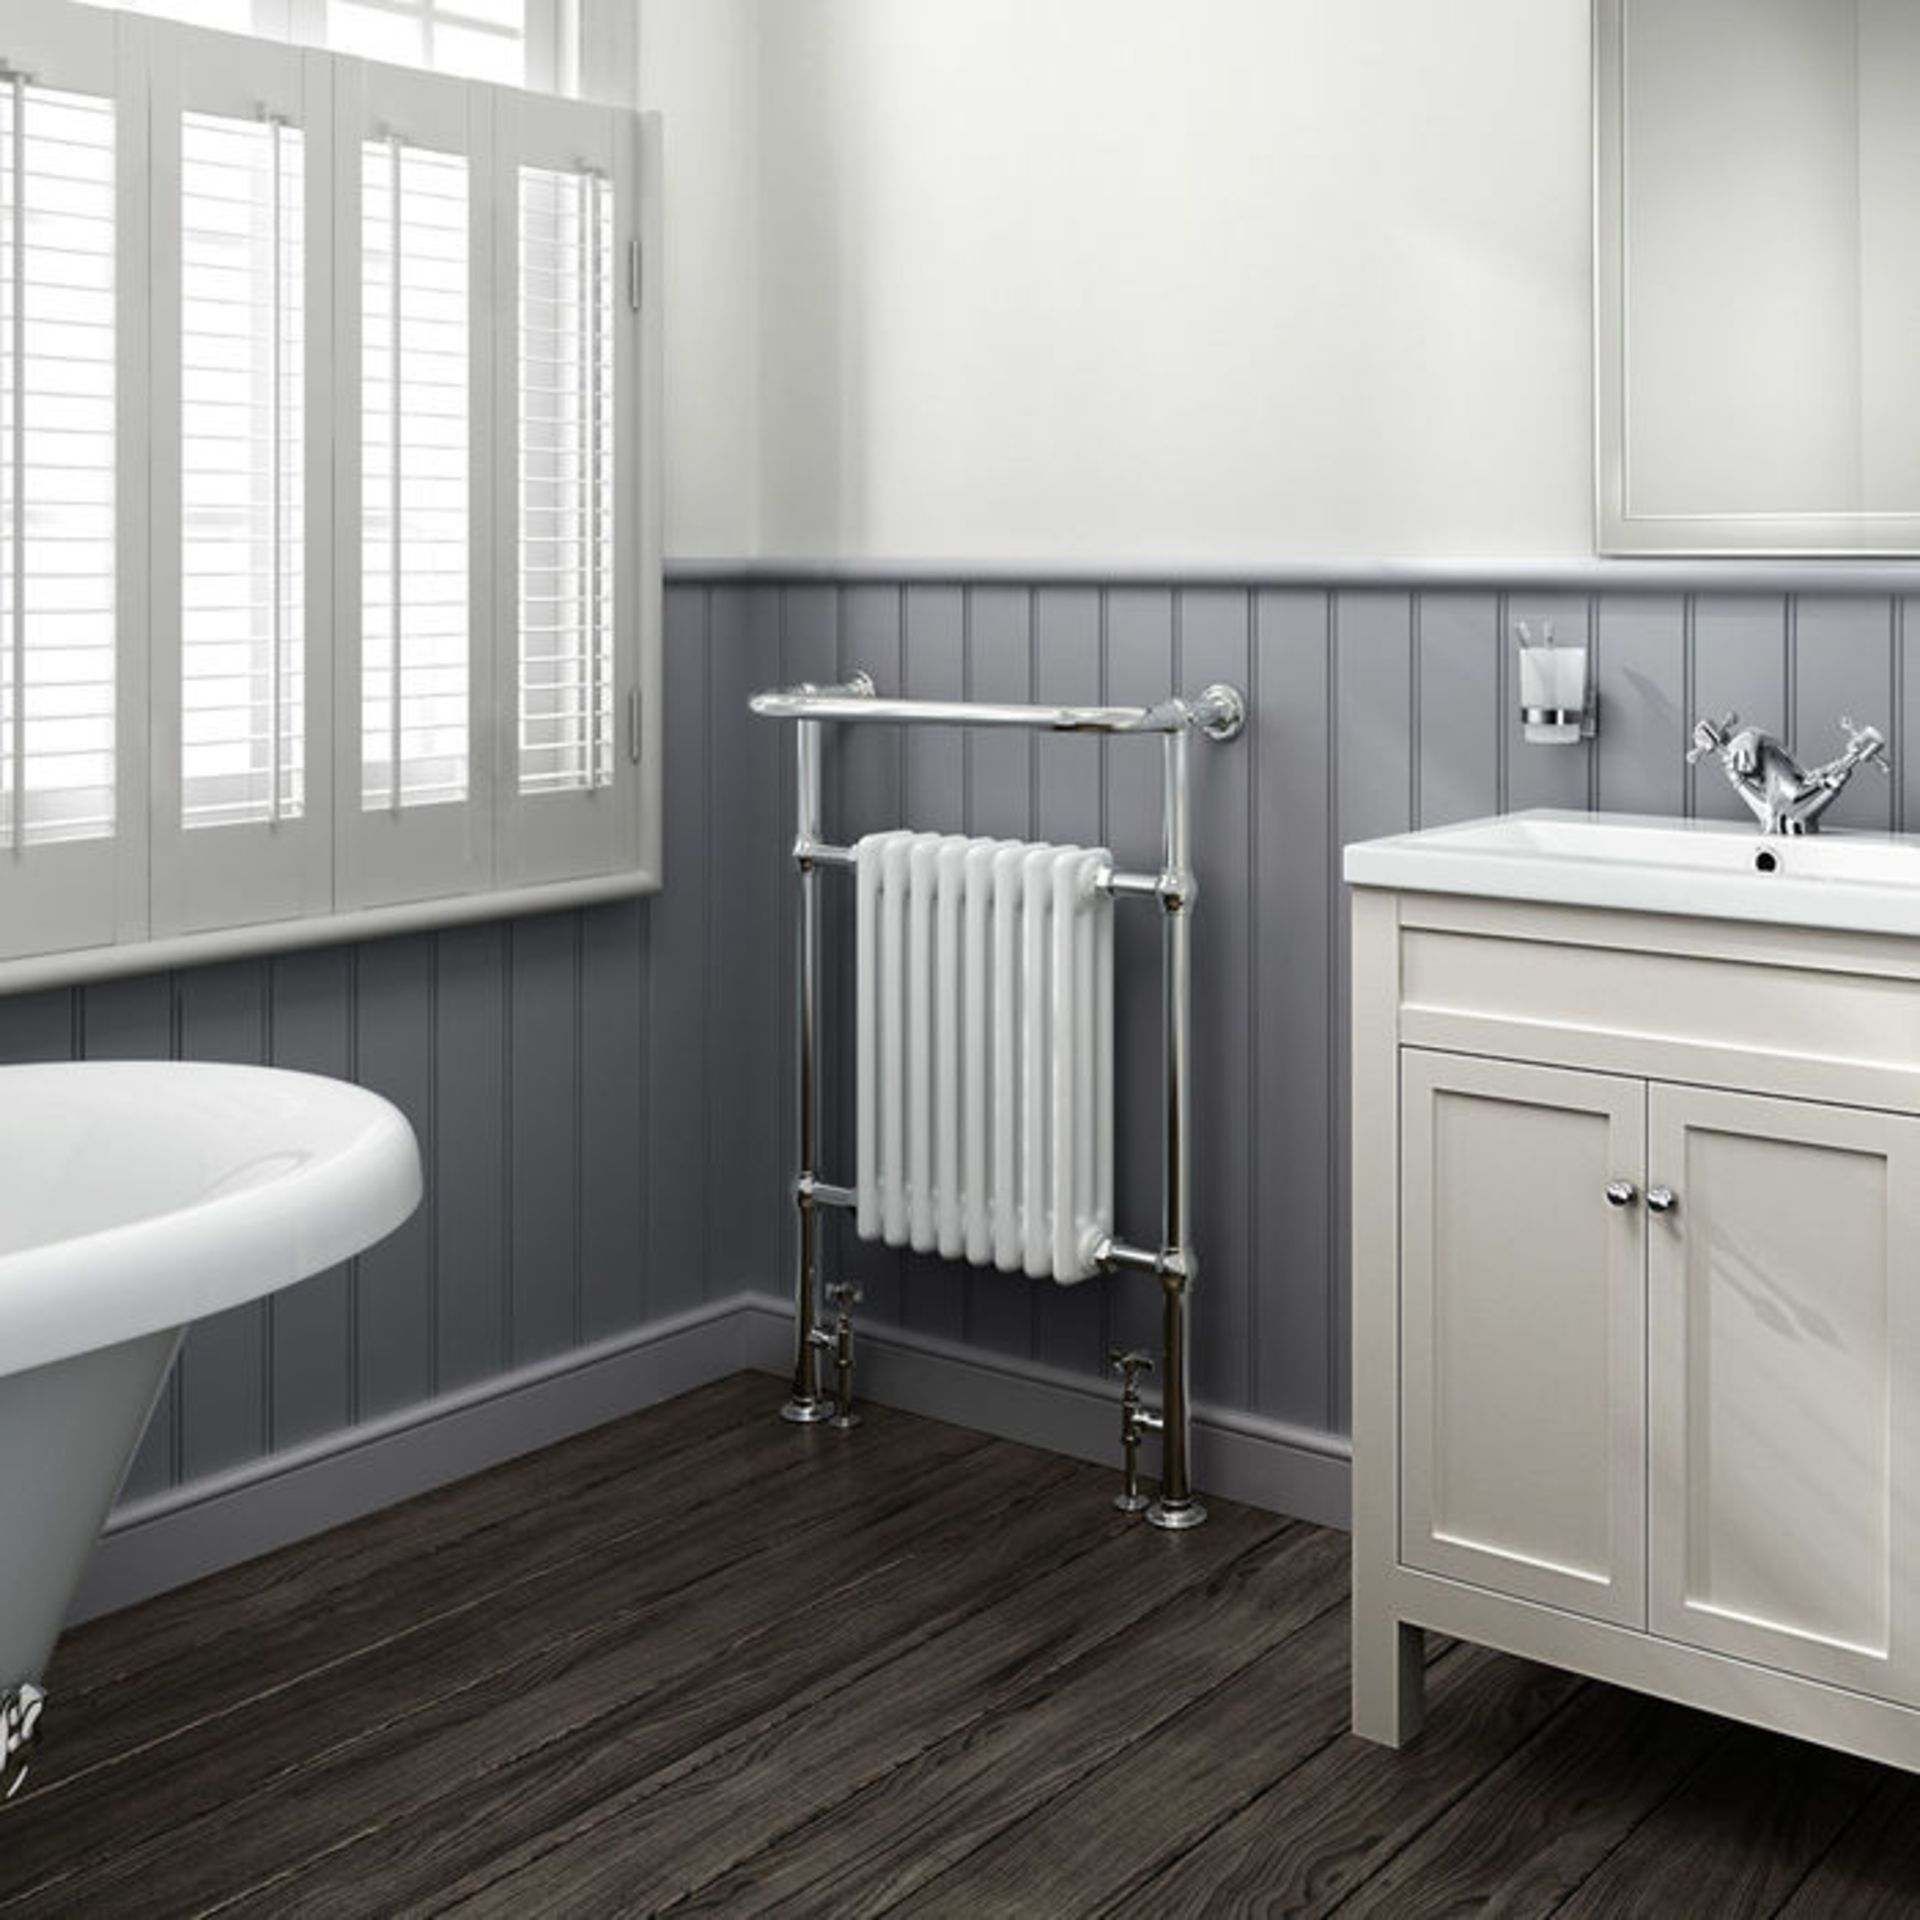 (HM117) 952x659mm Large Traditional White Premium Towel Rail Radiator. We love this because it... - Image 2 of 3